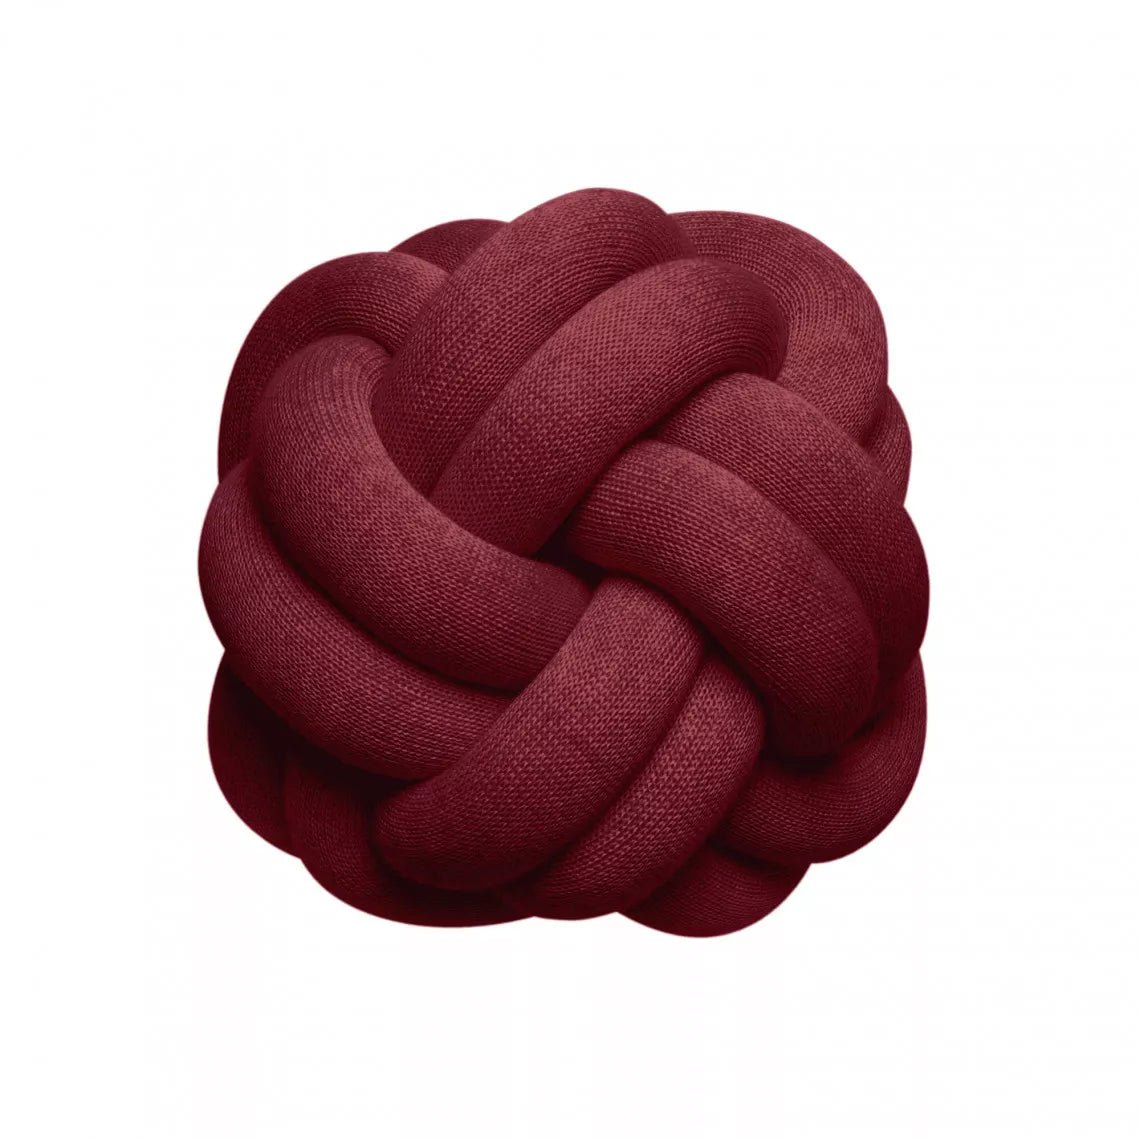 Knot Cusion - Knot Pillow